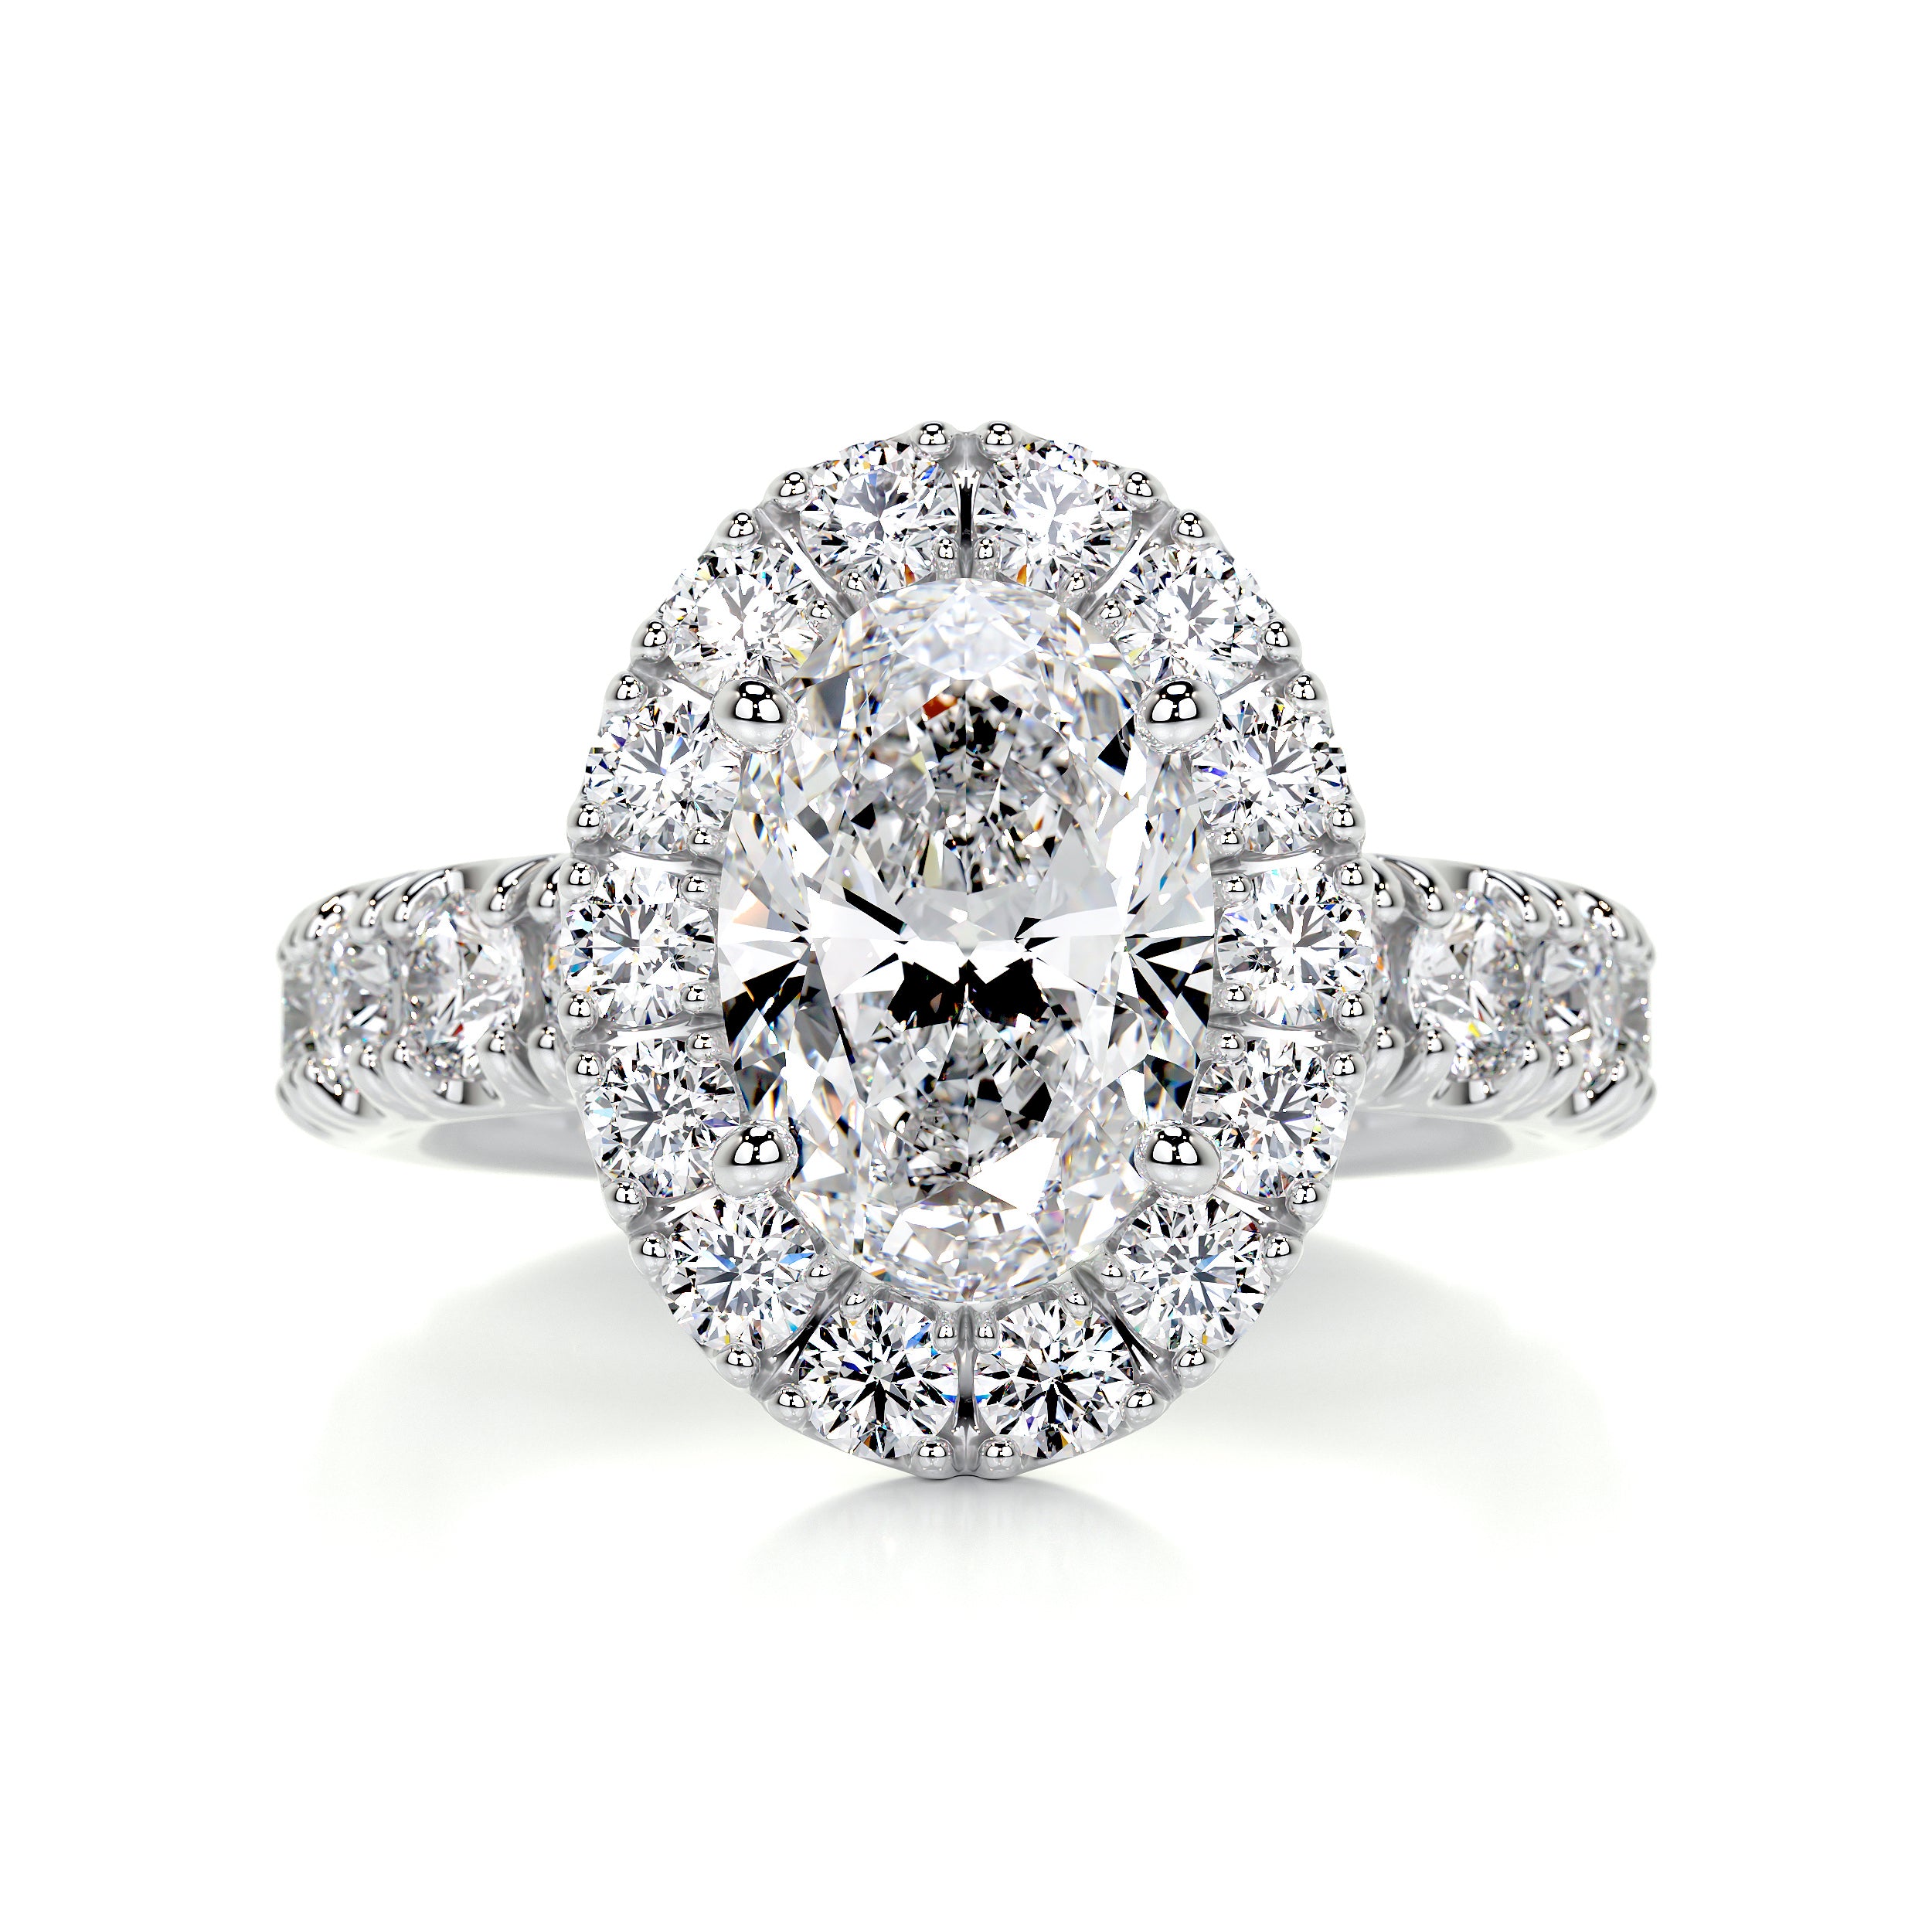 4-Prong Tiffany-Style Round Solitaire Engagement Ring | Dallas TX